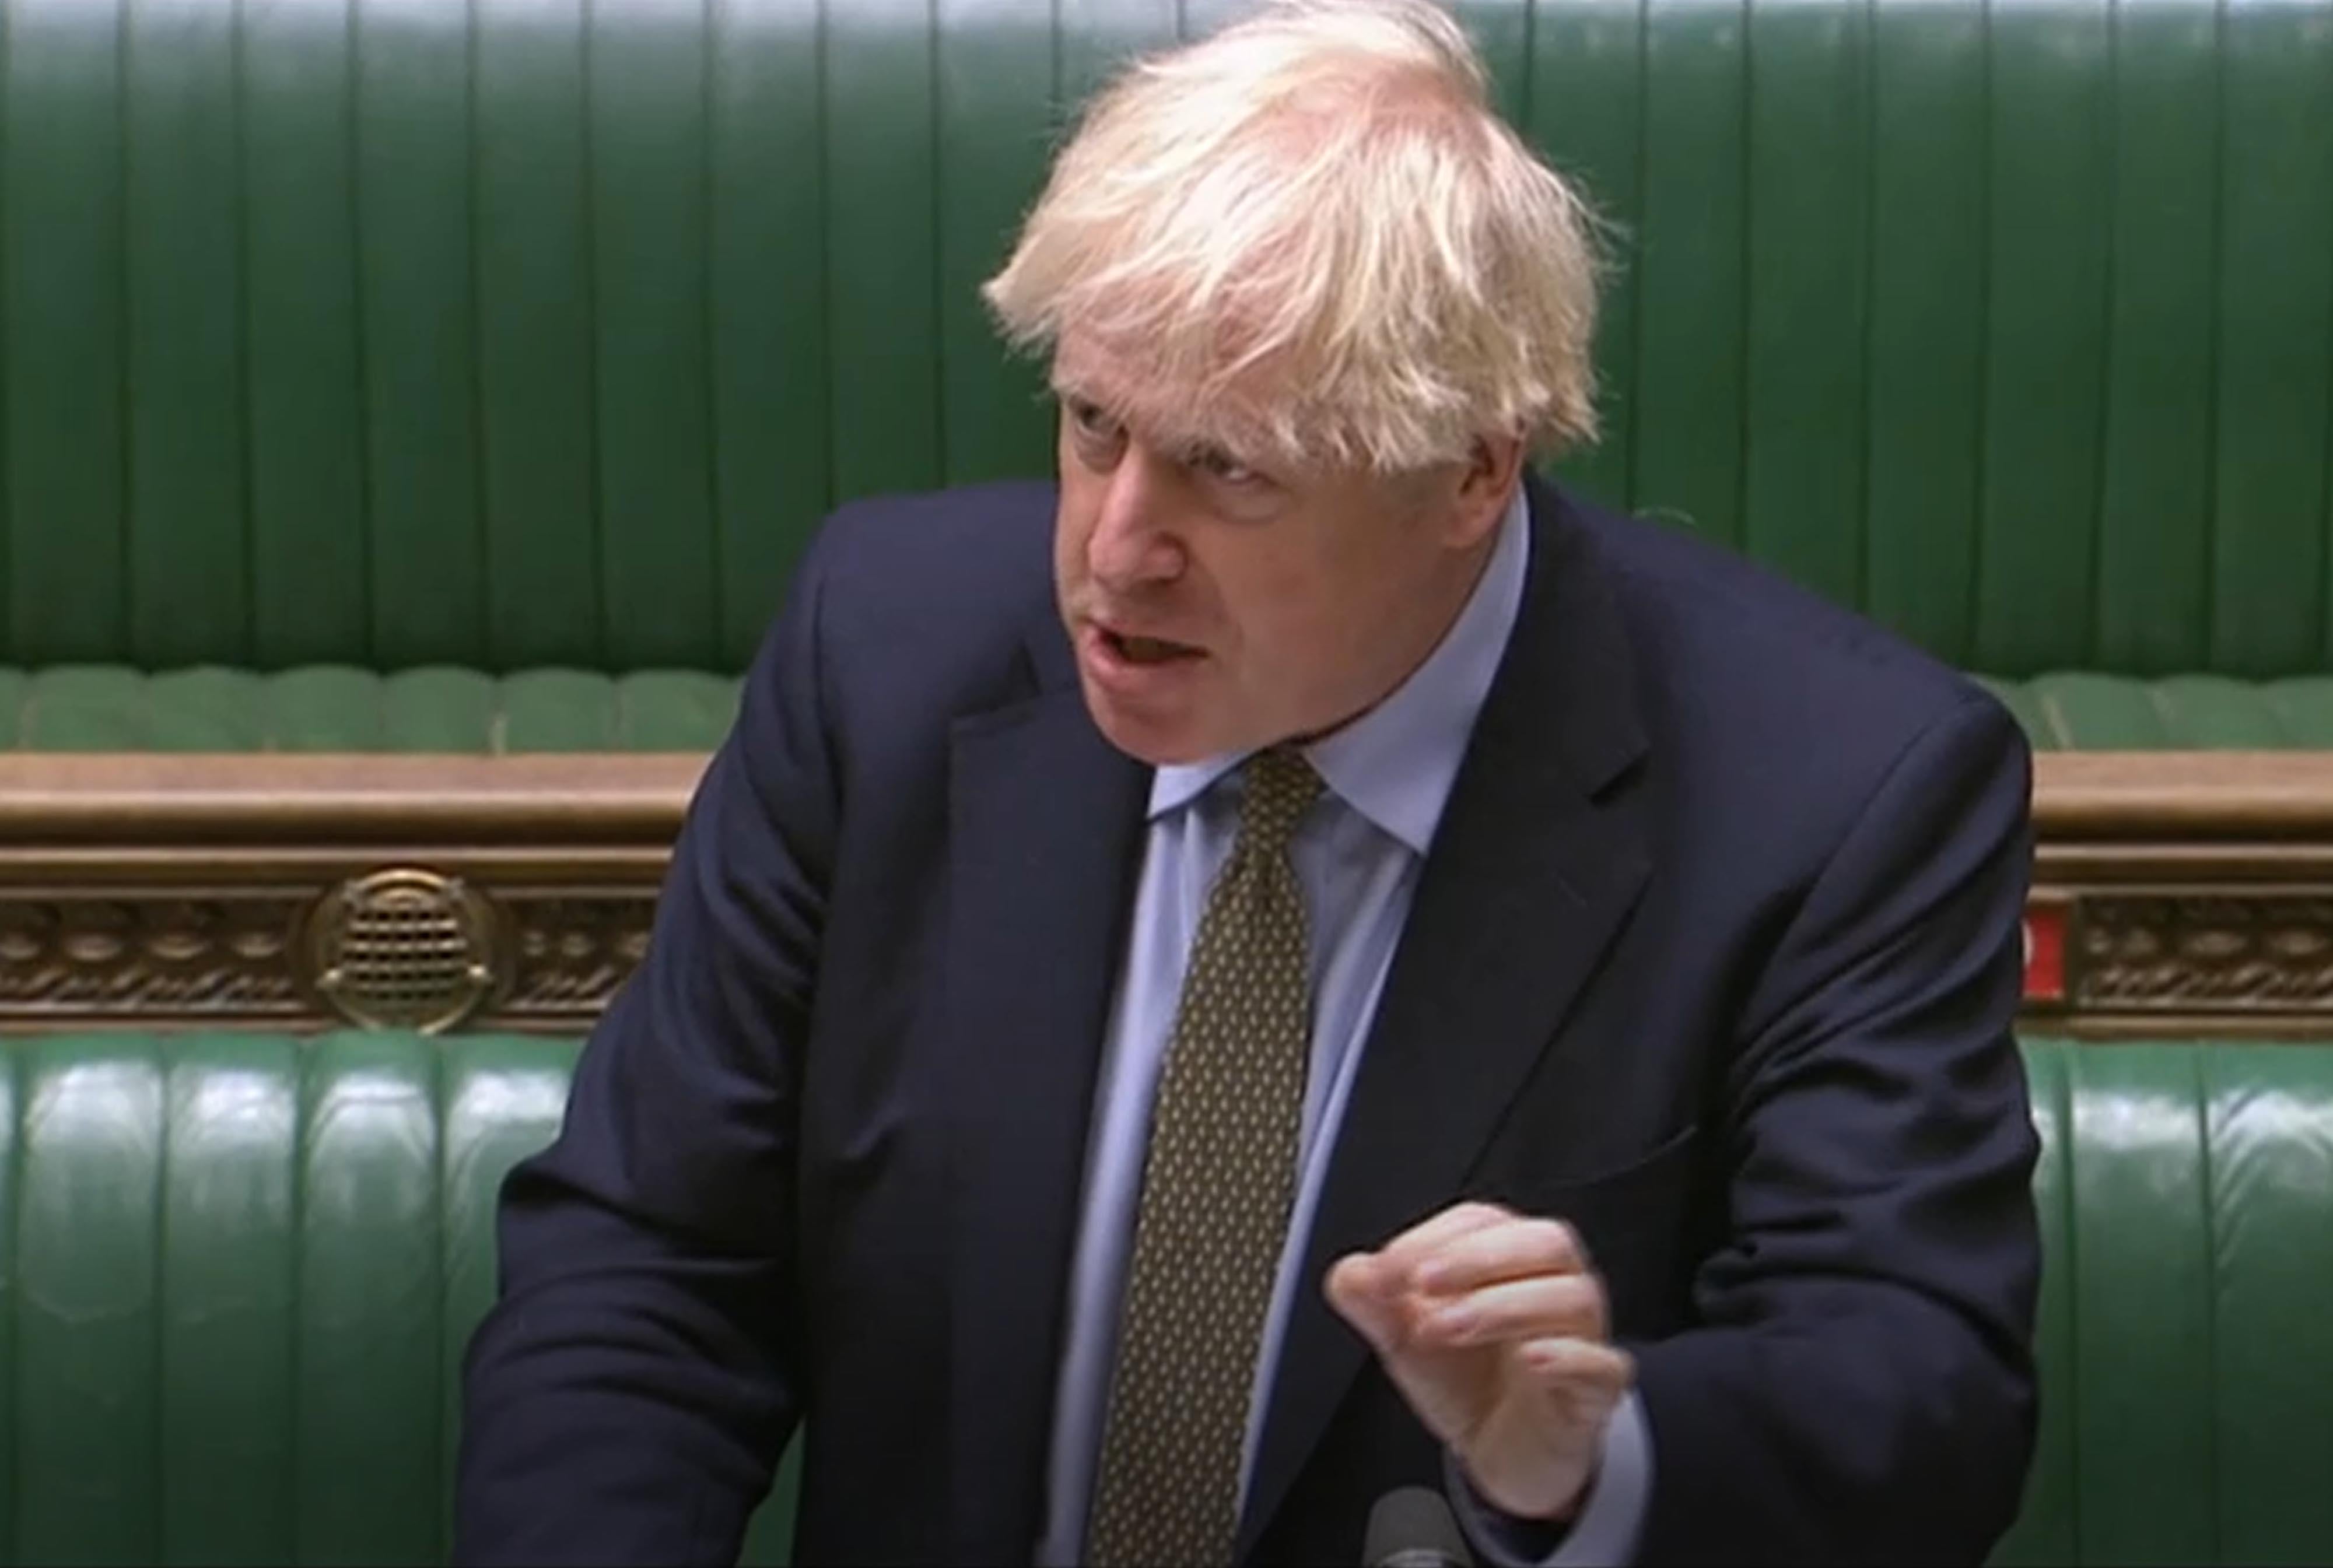 'Opportunism is the name of the game for the party opposite,' claimed Boris Johnson at PMQs